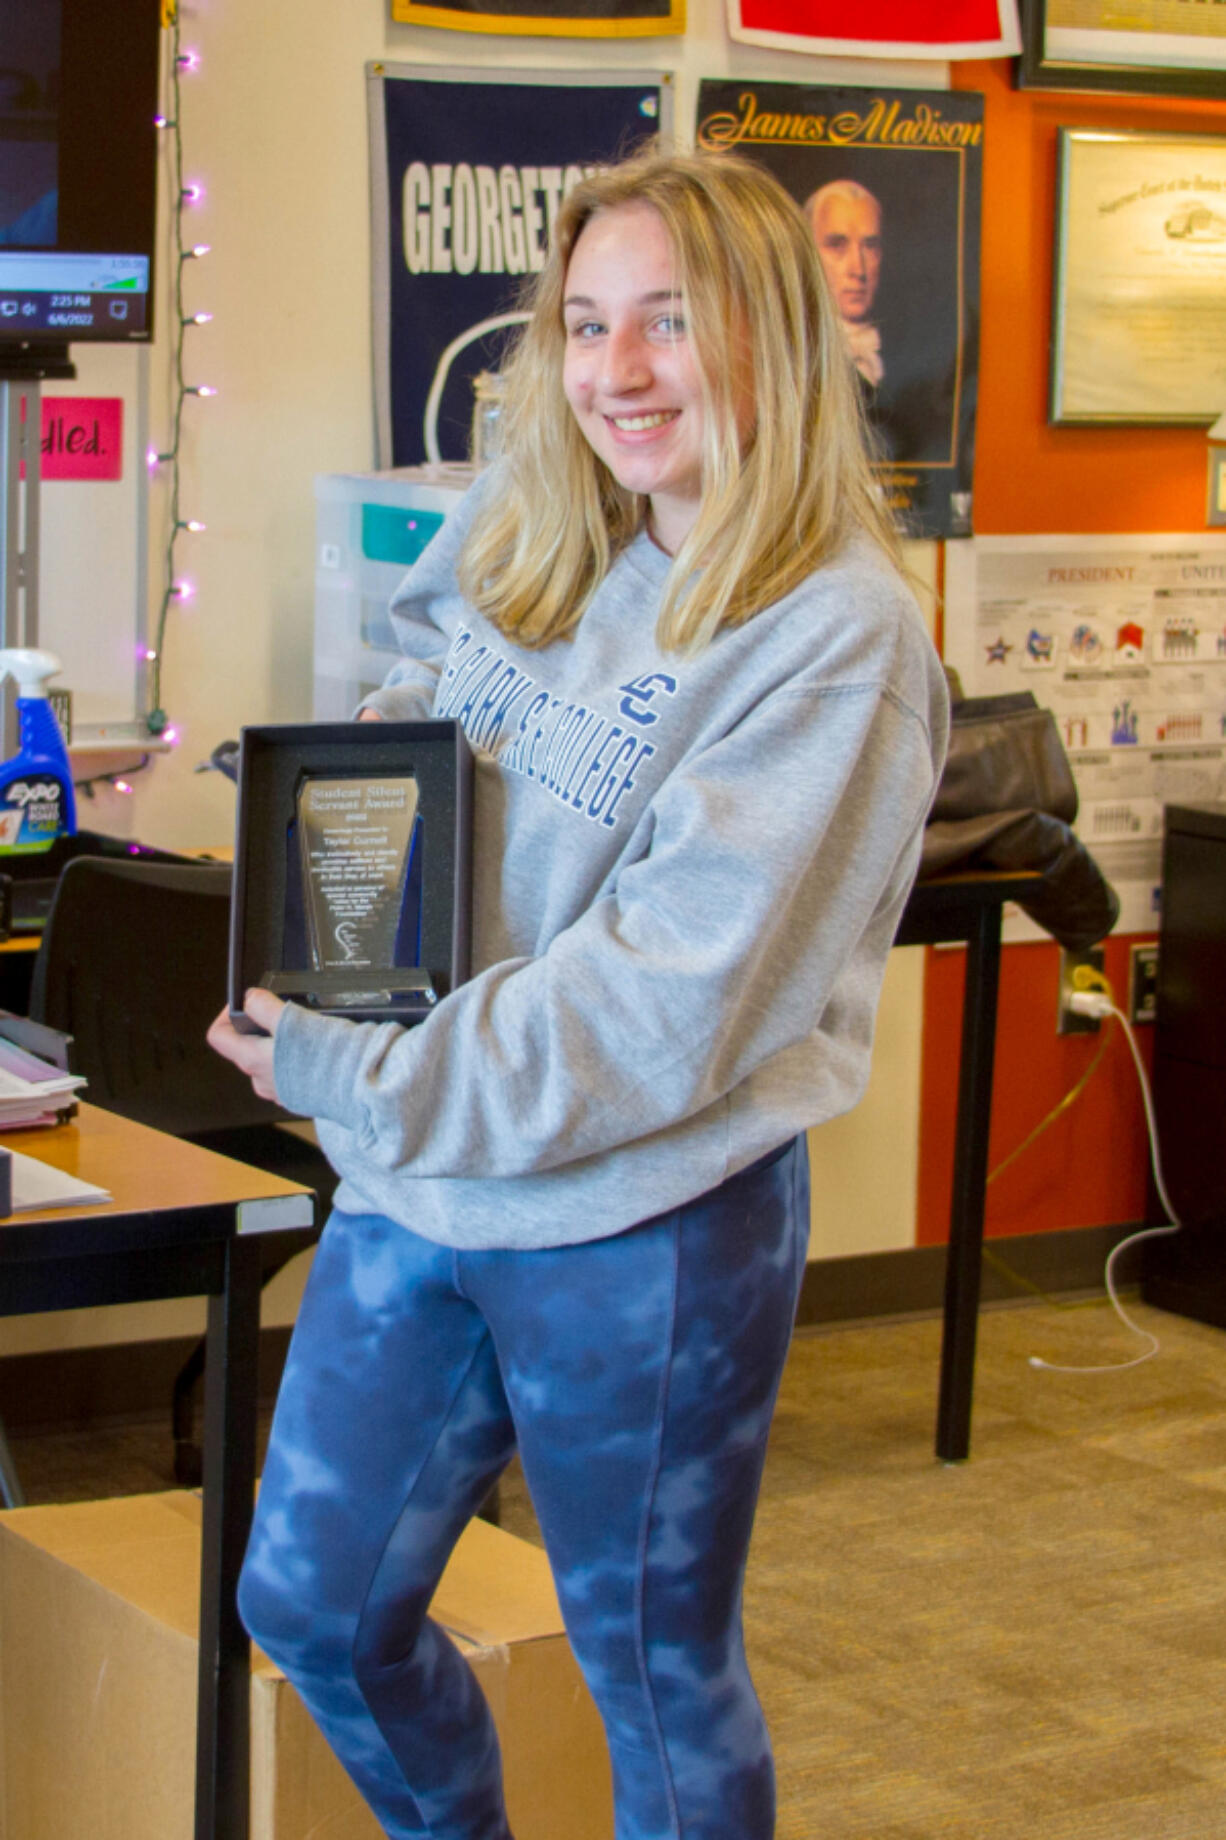 Woodland High School's Taylor Curnutt received the Silent Servant Student Award from the Peter R. Marsh Foundation which includes a special plaque along with a $500 grant for use toward Taylor's future plans.